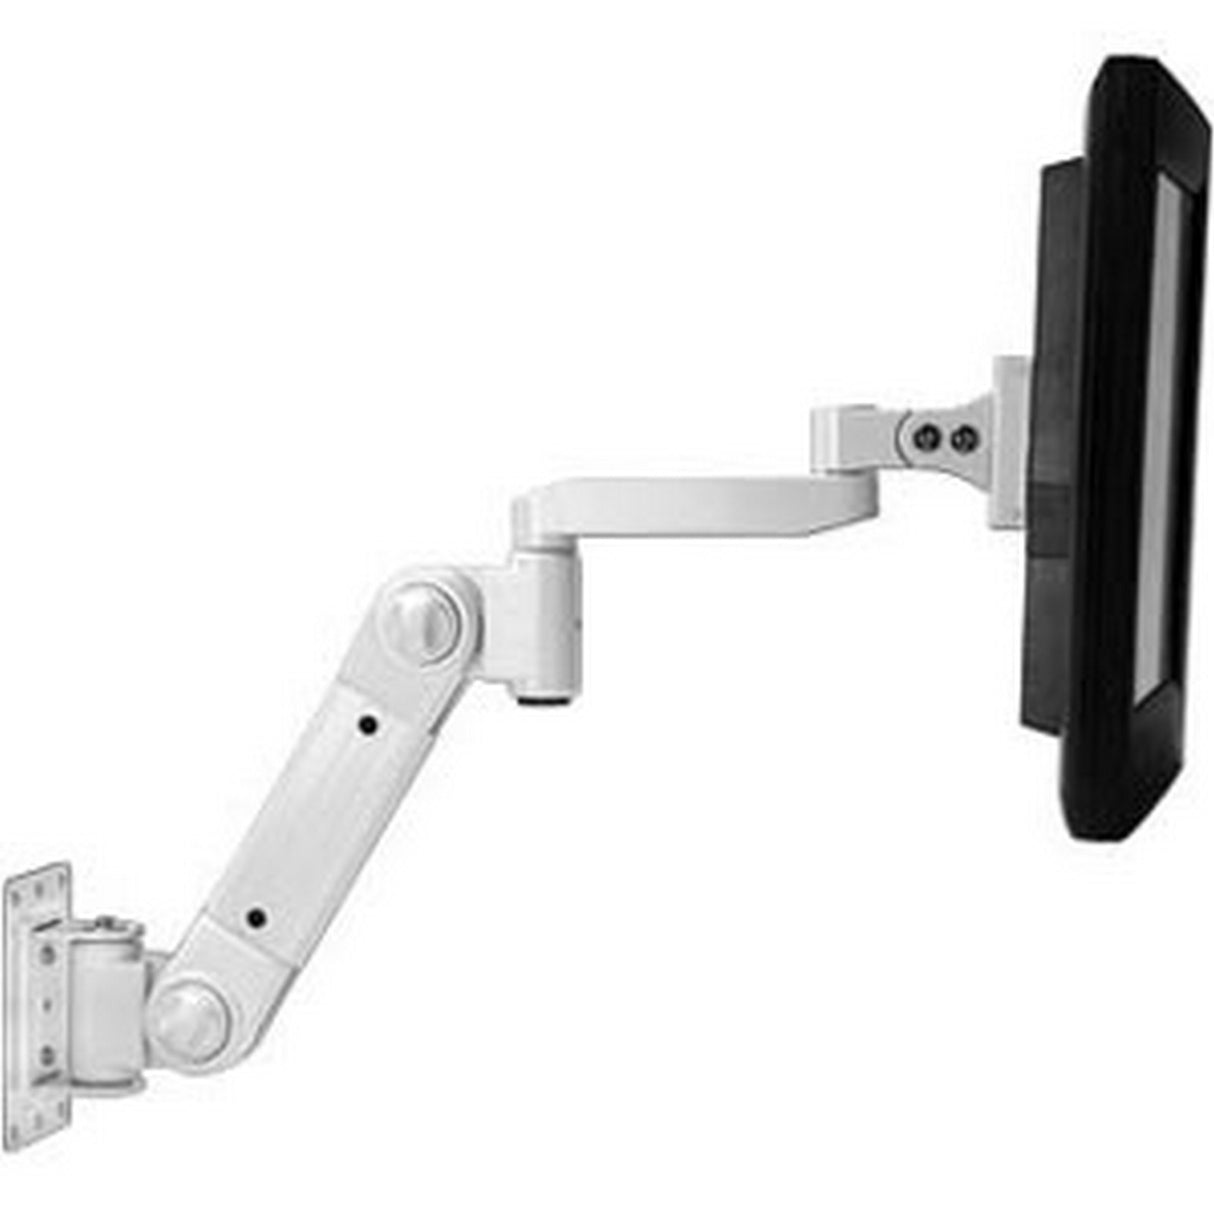 NTI ARM-WL-LCD-HE Wall Mount LCD Arm with Heavy Load Extension, White